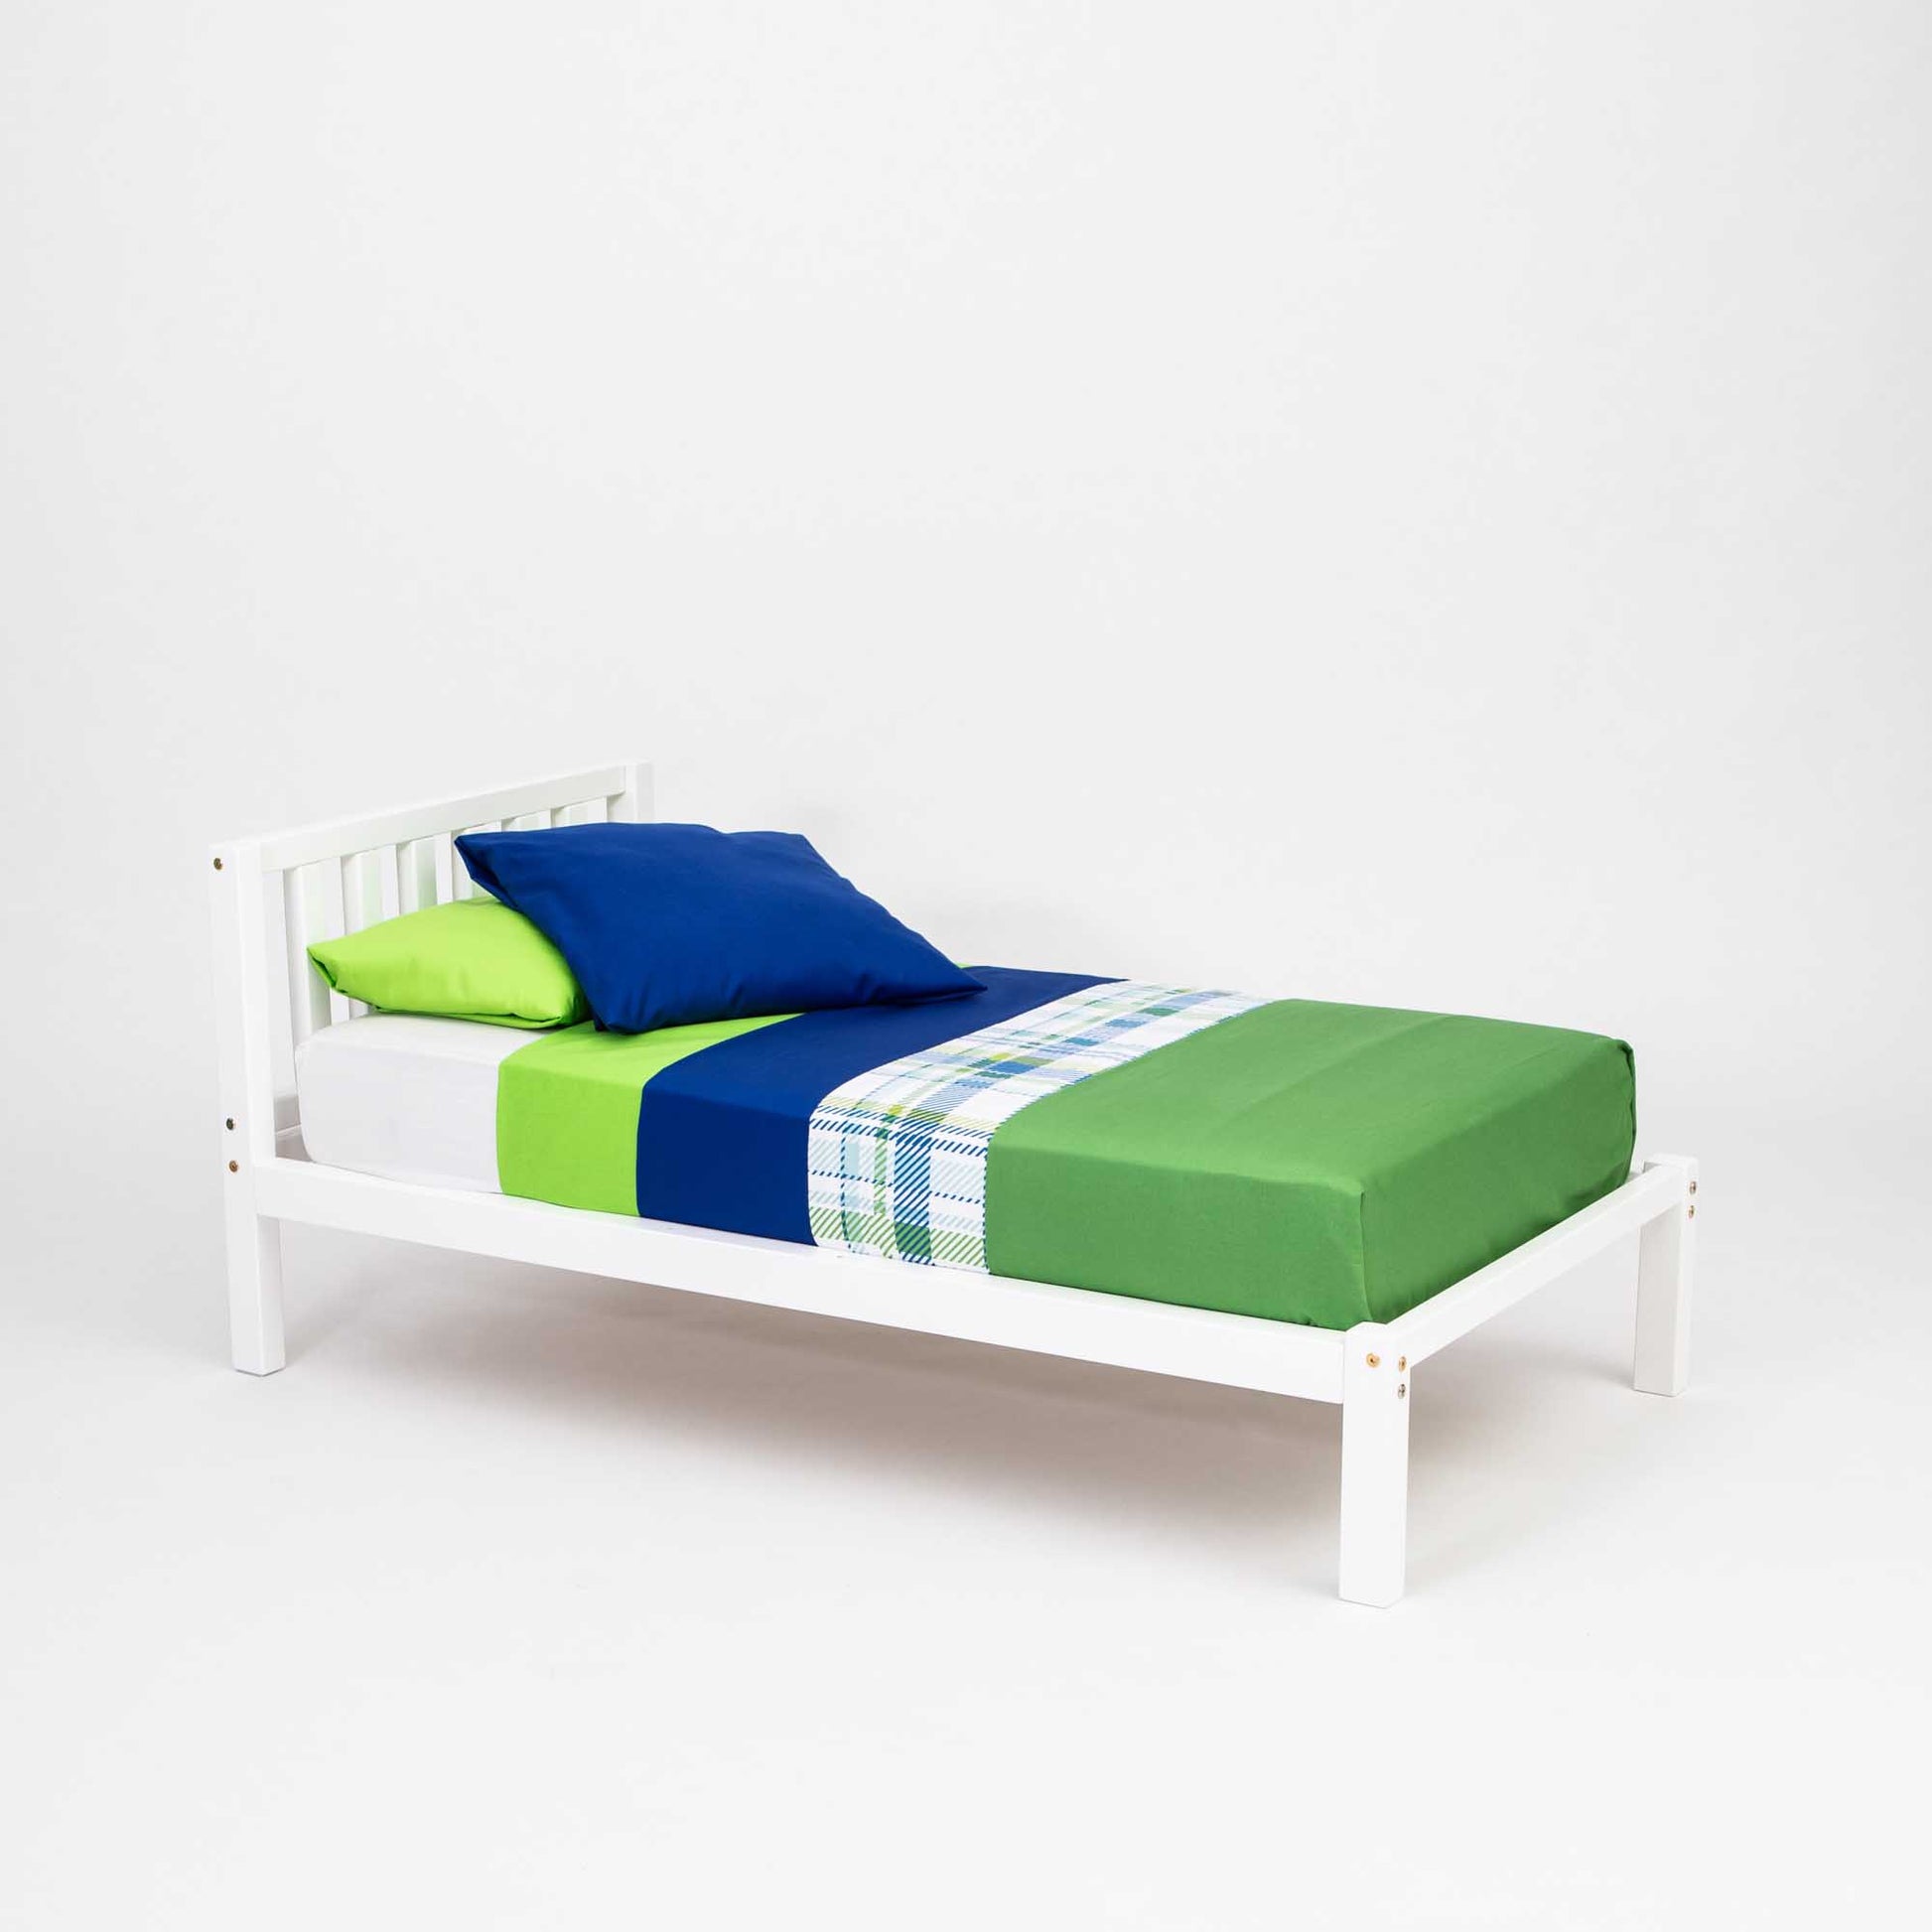 A 2-in-1 toddler bed on legs with a vertical rail headboard from the brand Sweet Home From Wood, adorned with a green and blue comforter.